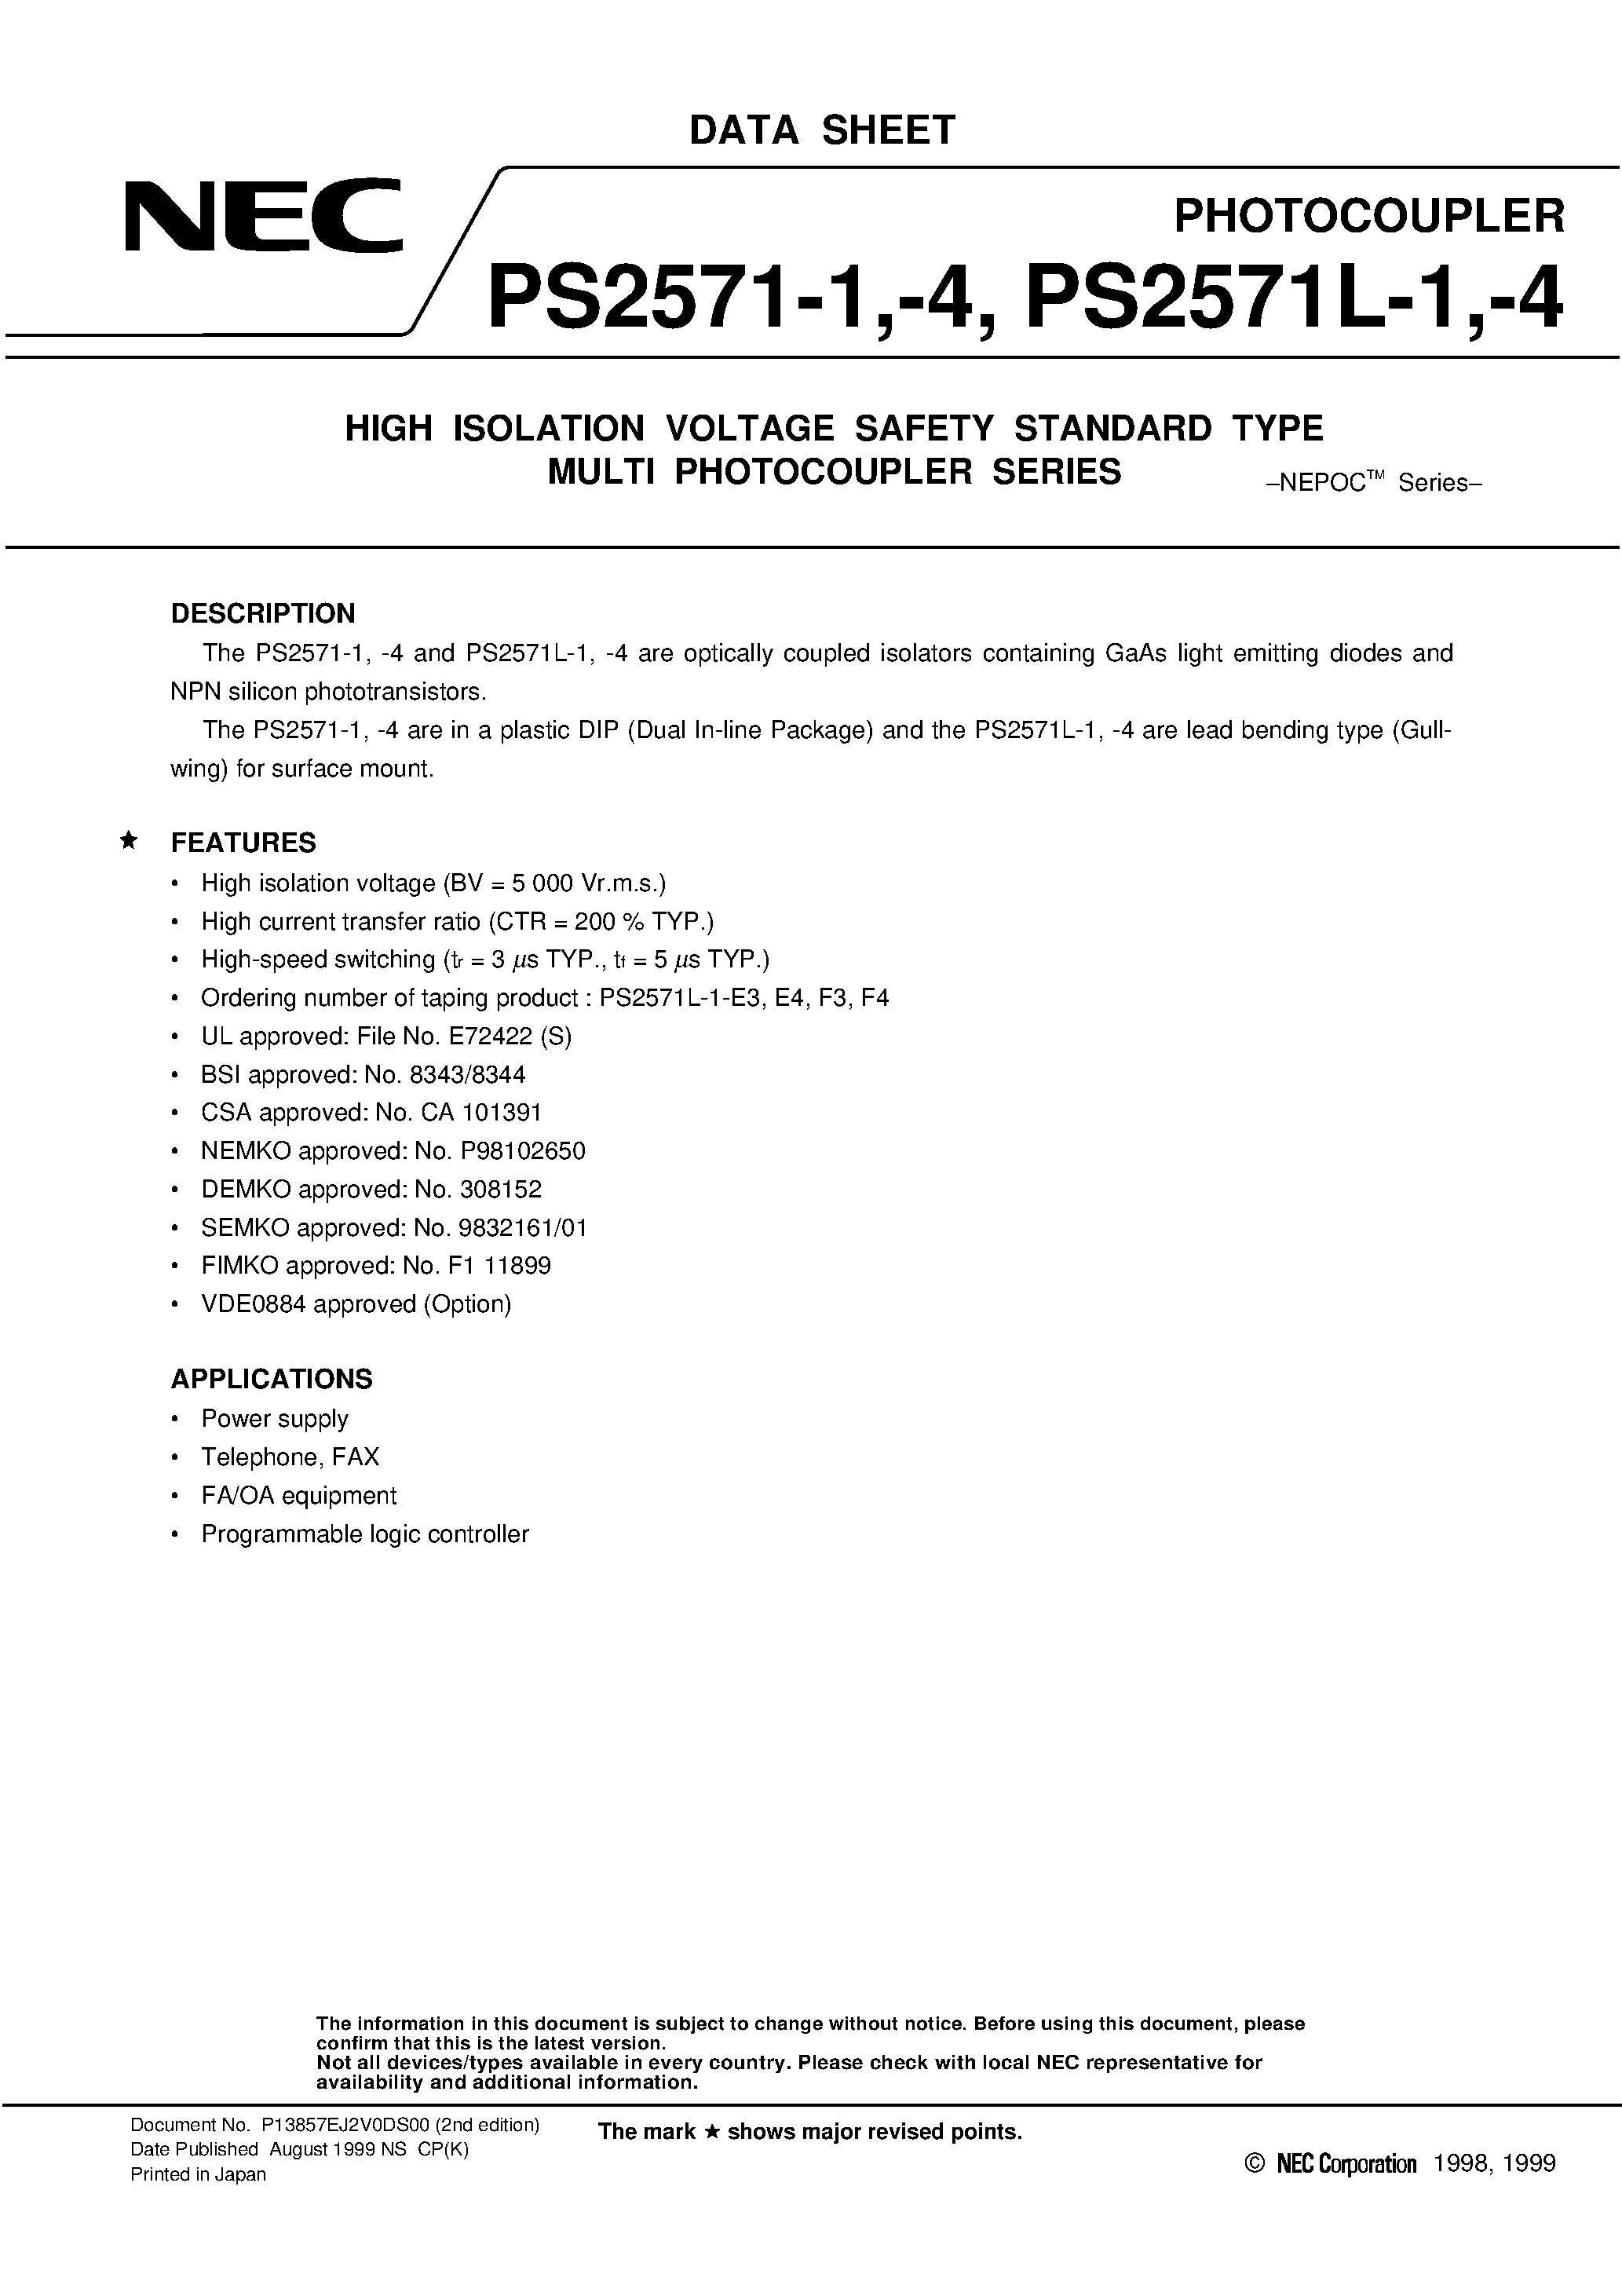 Datasheet PS2571L-1-V-E4 - HIGH ISOLATION VOLTAGE SAFETY STANDARD TYPE MULTI PHOTOCOUPLER SERIES page 1